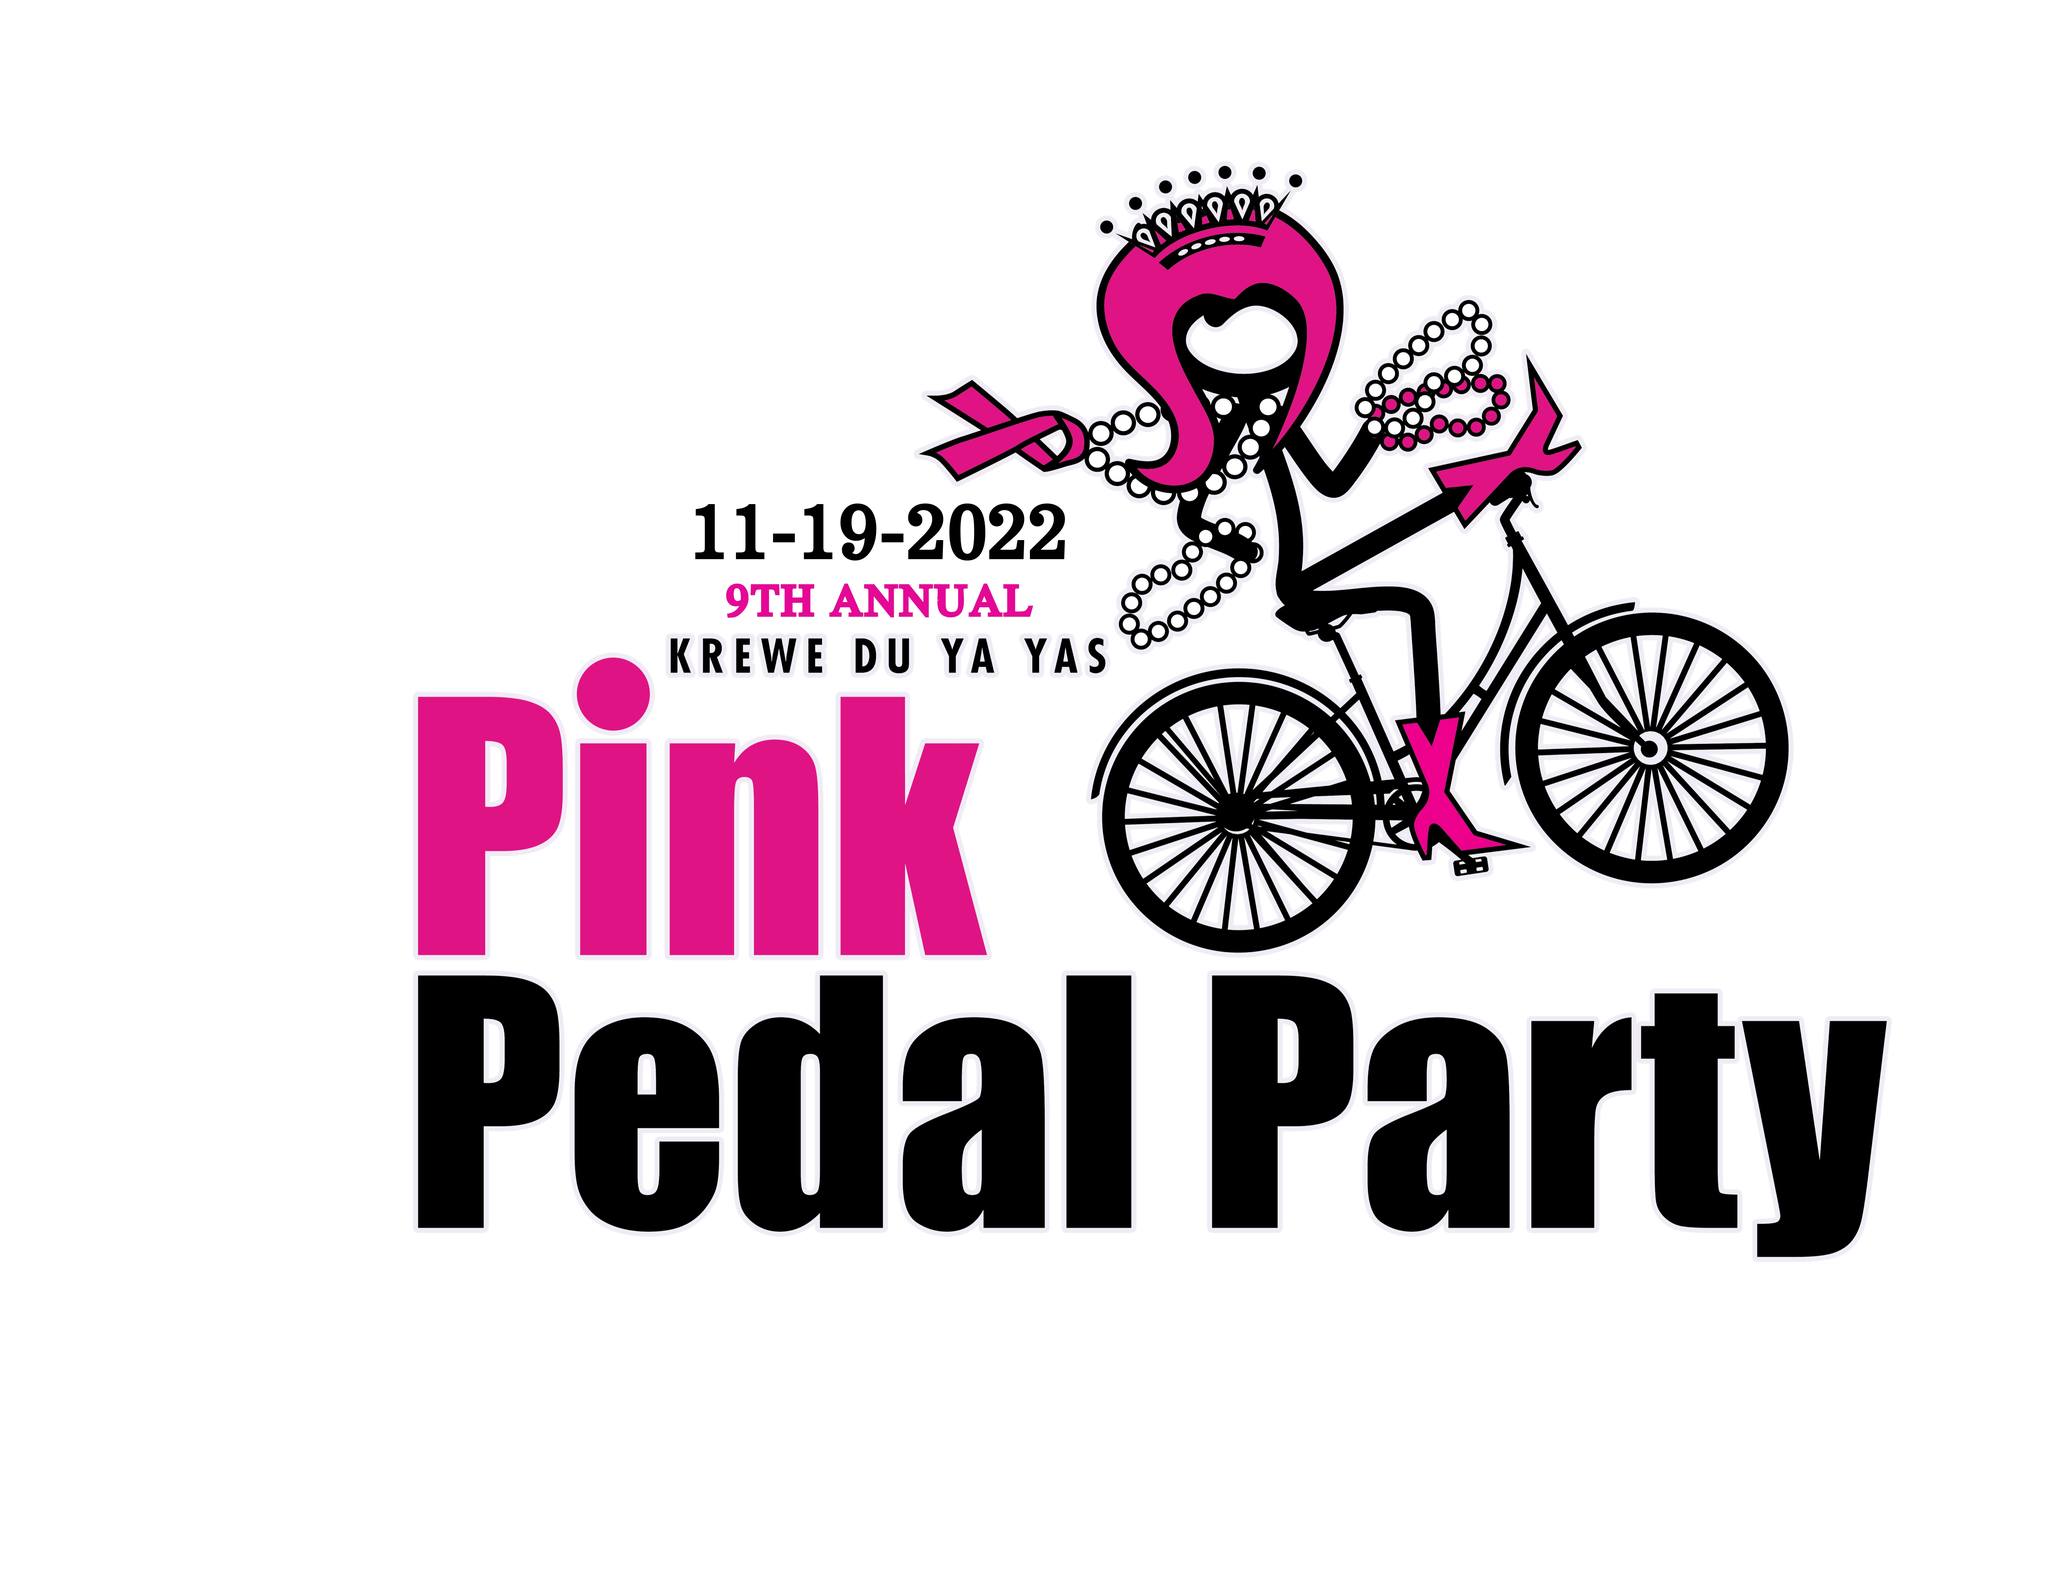 9th Annual Pink Pedal Party